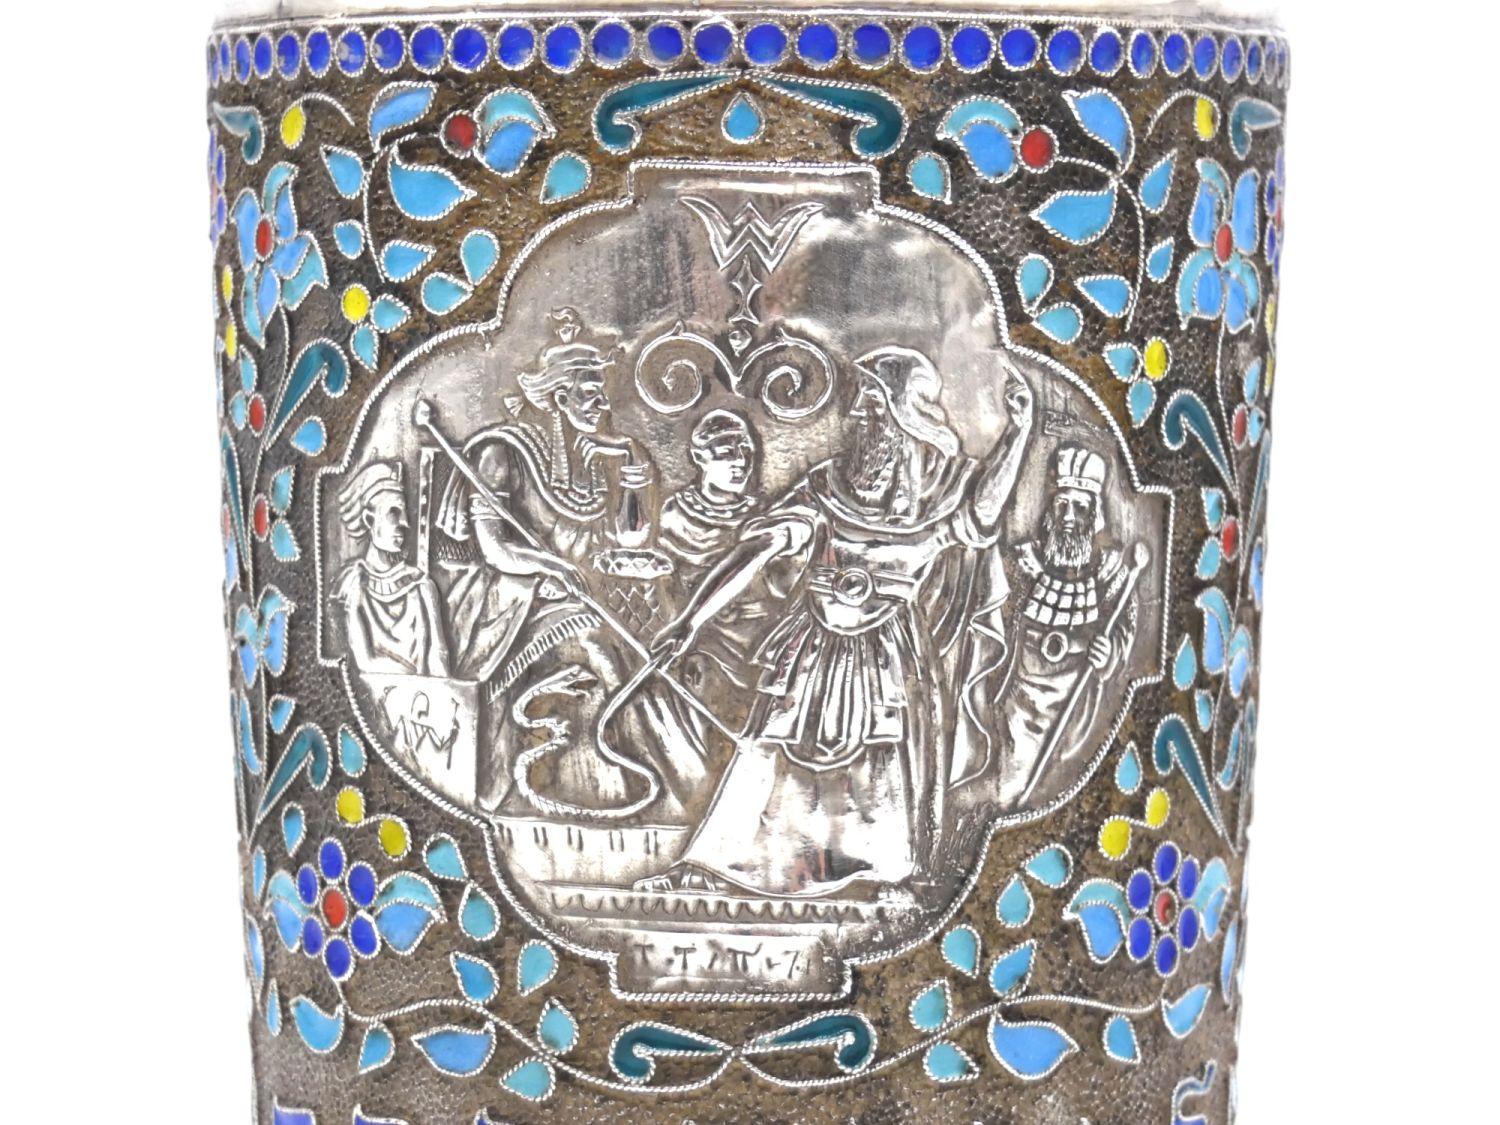 A Silver and Enamel Passover Kiddush Cup by Henryk Winograd, New York, 1995


Spectacular Kiddush cup for the Passover holiday beautifully embellished with floral and enamel motifs each encircled with fine filigree. Cartouche at front center